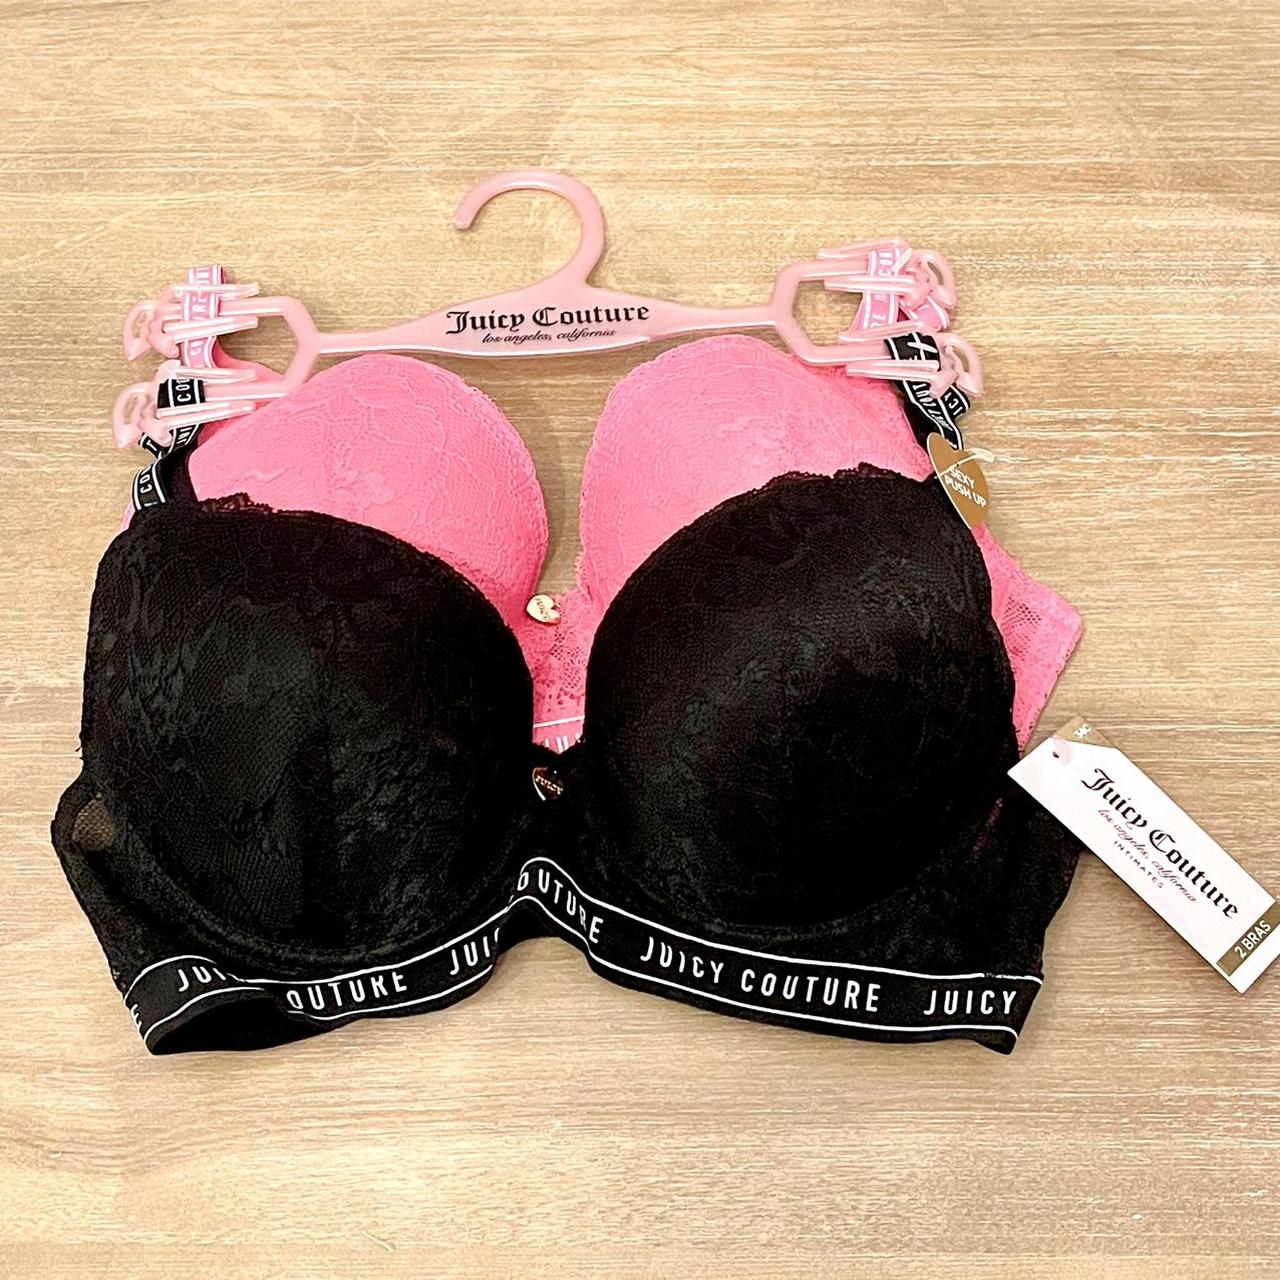 Juicy Couture, Intimates & Sleepwear, Nwt Juicy Couture Pushup Bras 34c